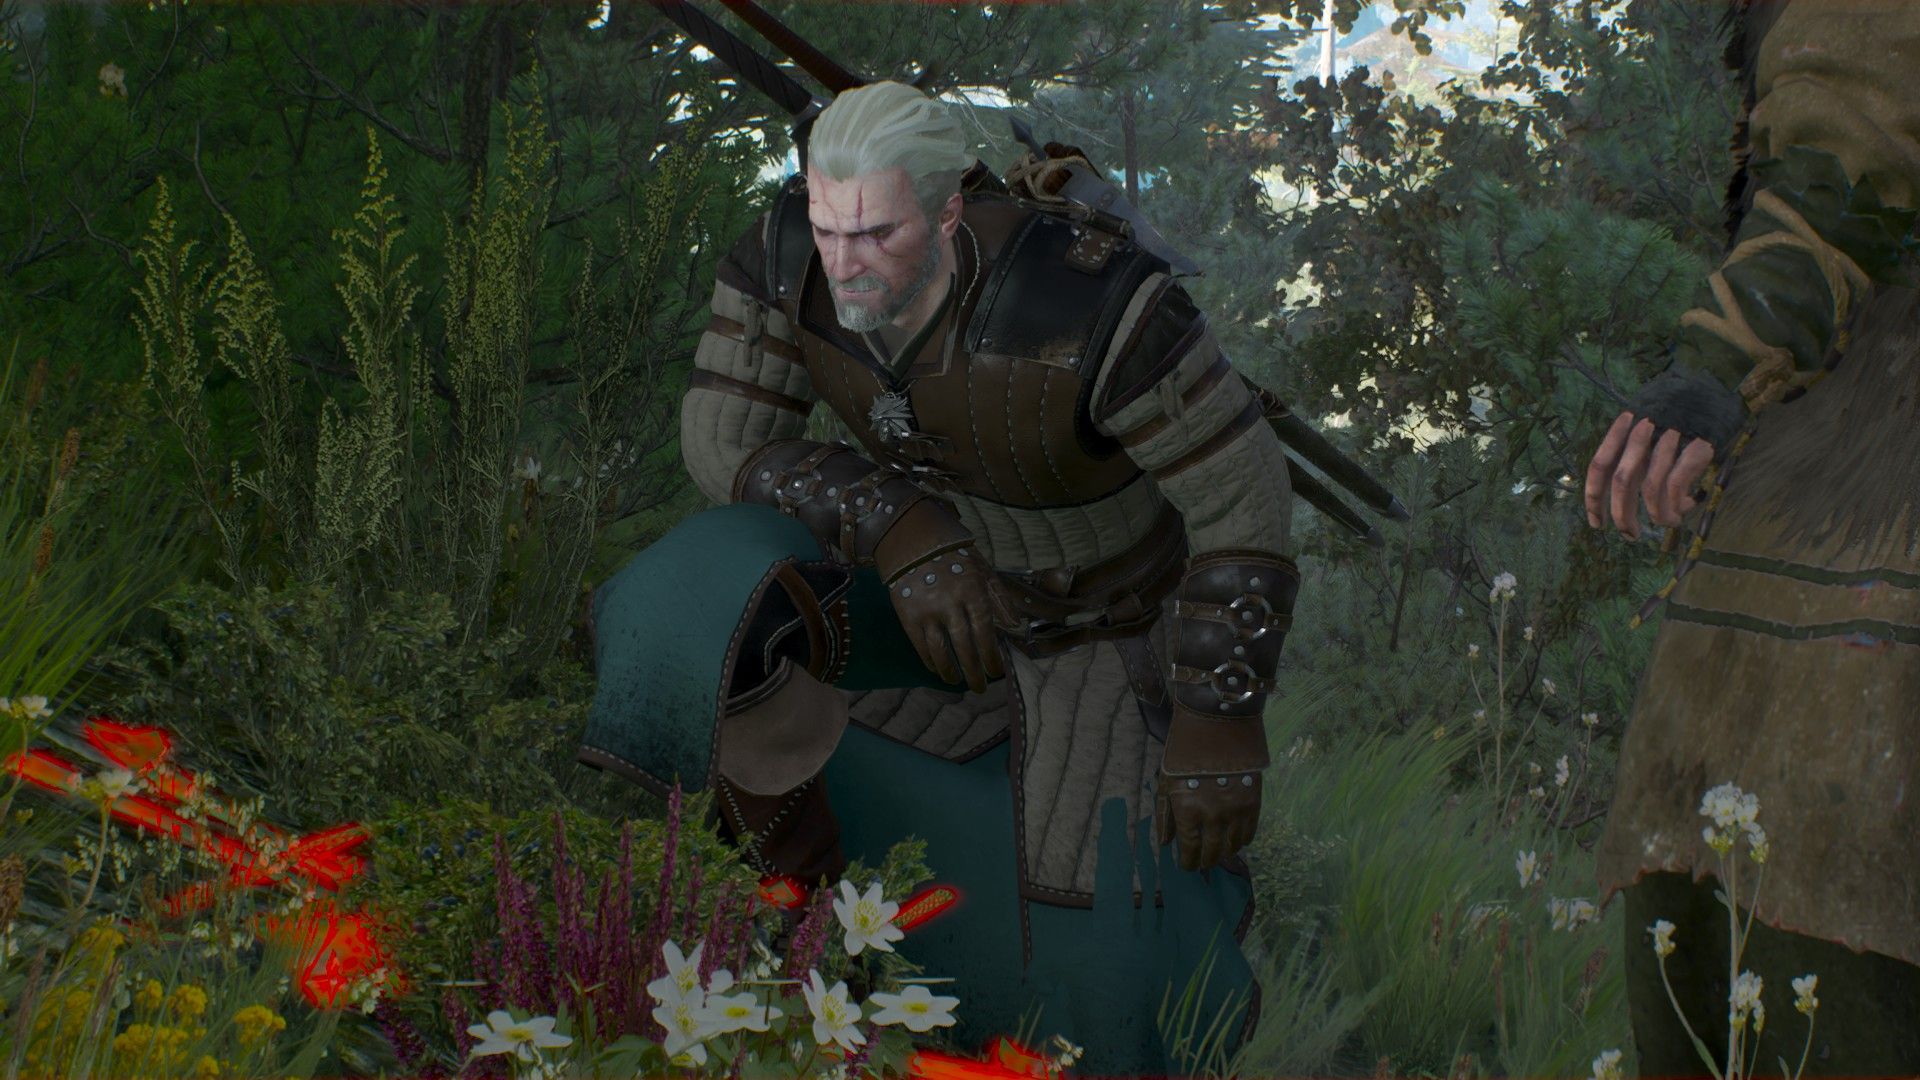 Geralt fell to his knees in Skellige's forest, examining the plants while the other druids talked to him.